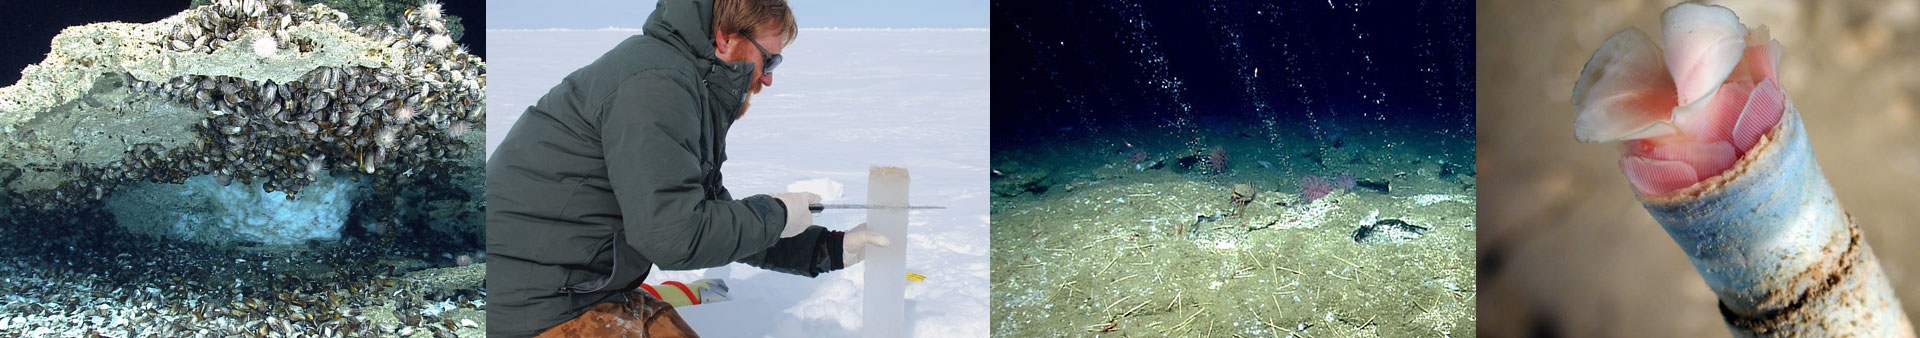 Methane hydrate and mussels; ice coring; gas seep with bubbles; tube worm